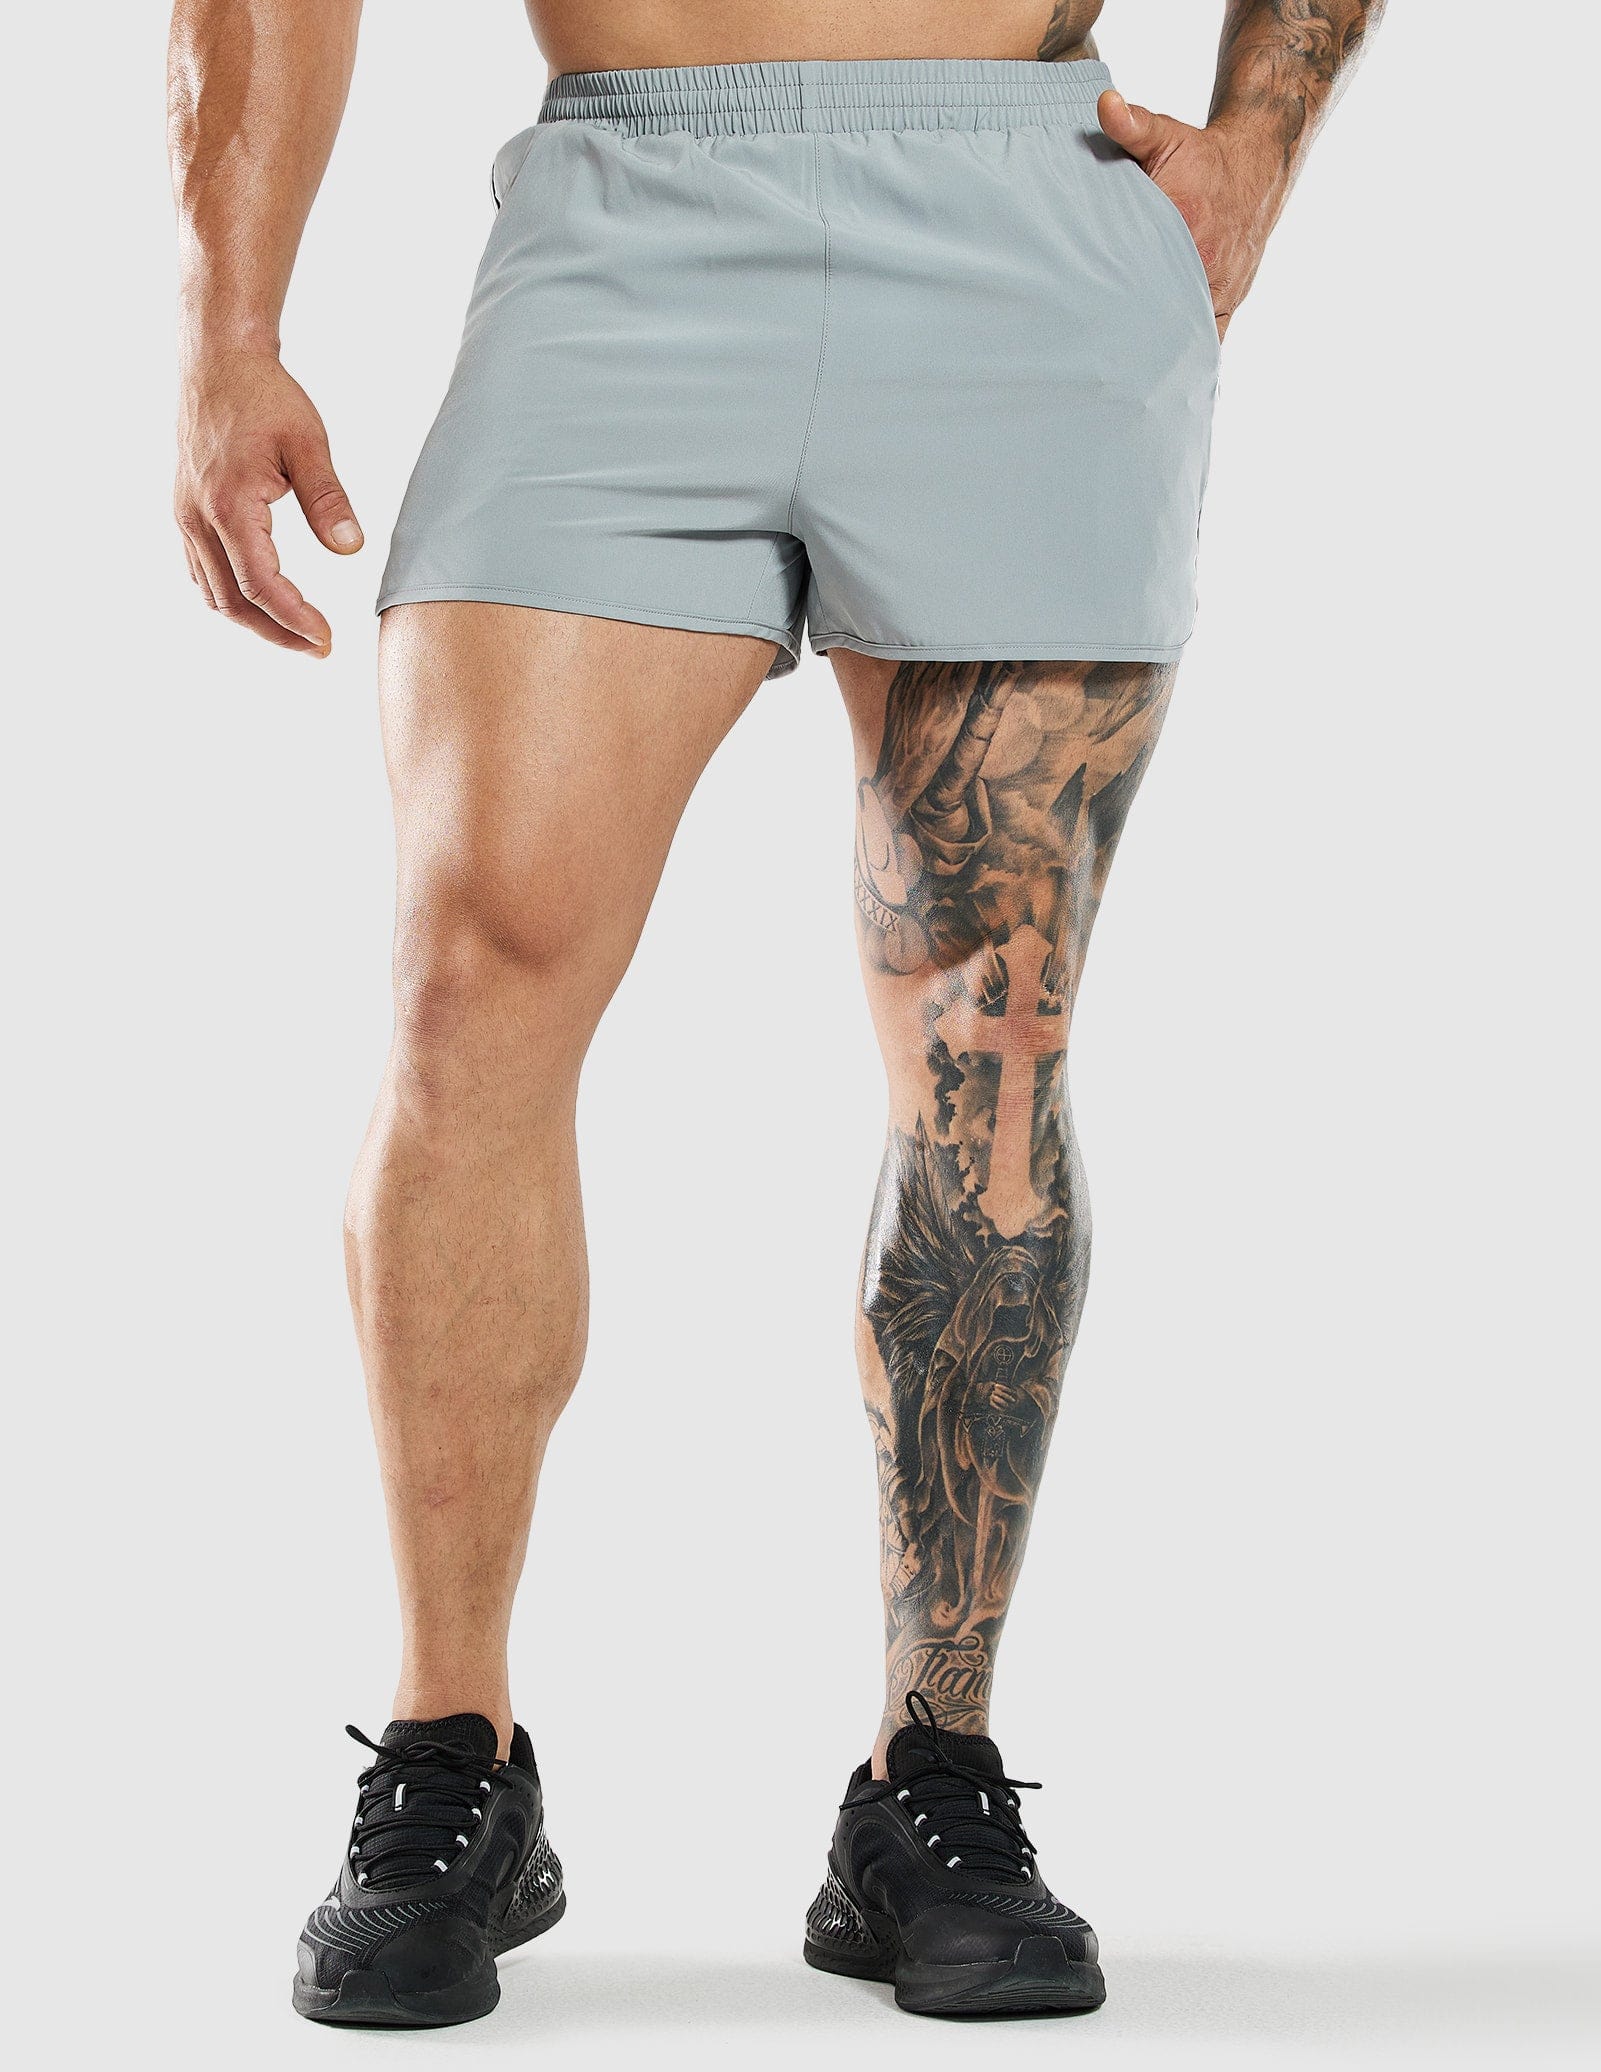 Men's 3 Inches Quick Dry Running Shorts with Liner Zip Pockets Men's Shorts Light Gray / S MIER